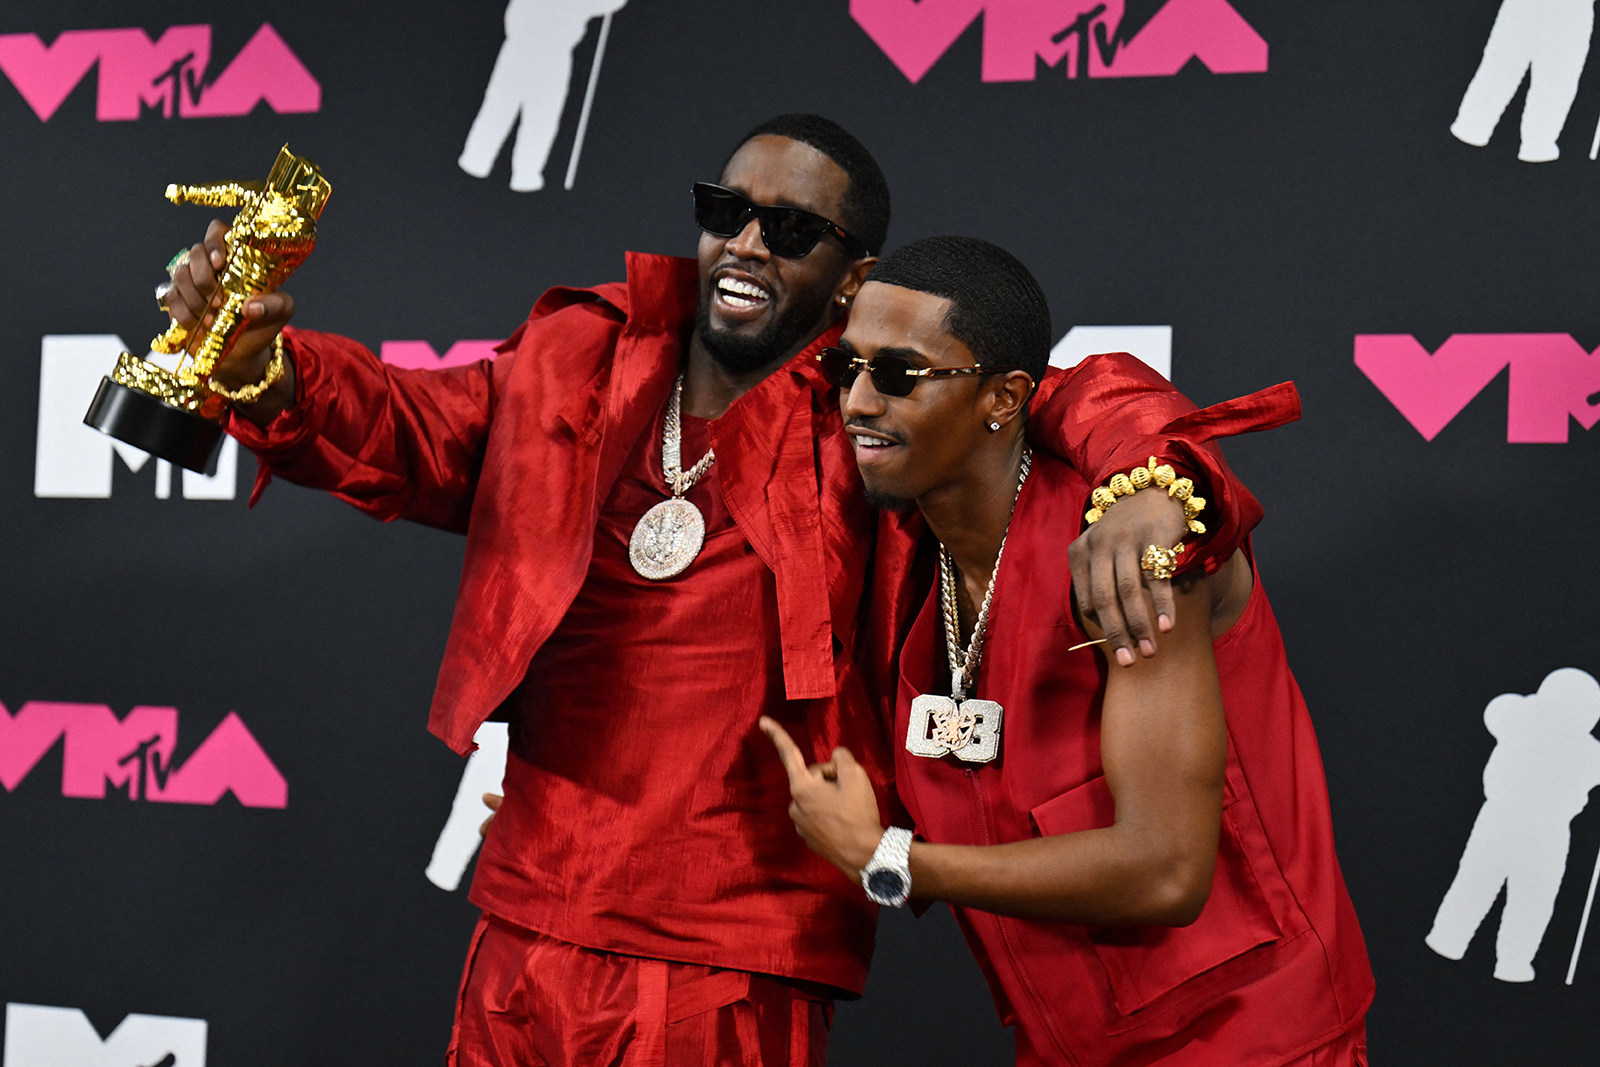 Sean “Diddy” Combs (left) and his son Christian “King” Combs at the 2023 MTV Video Music Awards in Newark, New Jersey. Photo: TNS